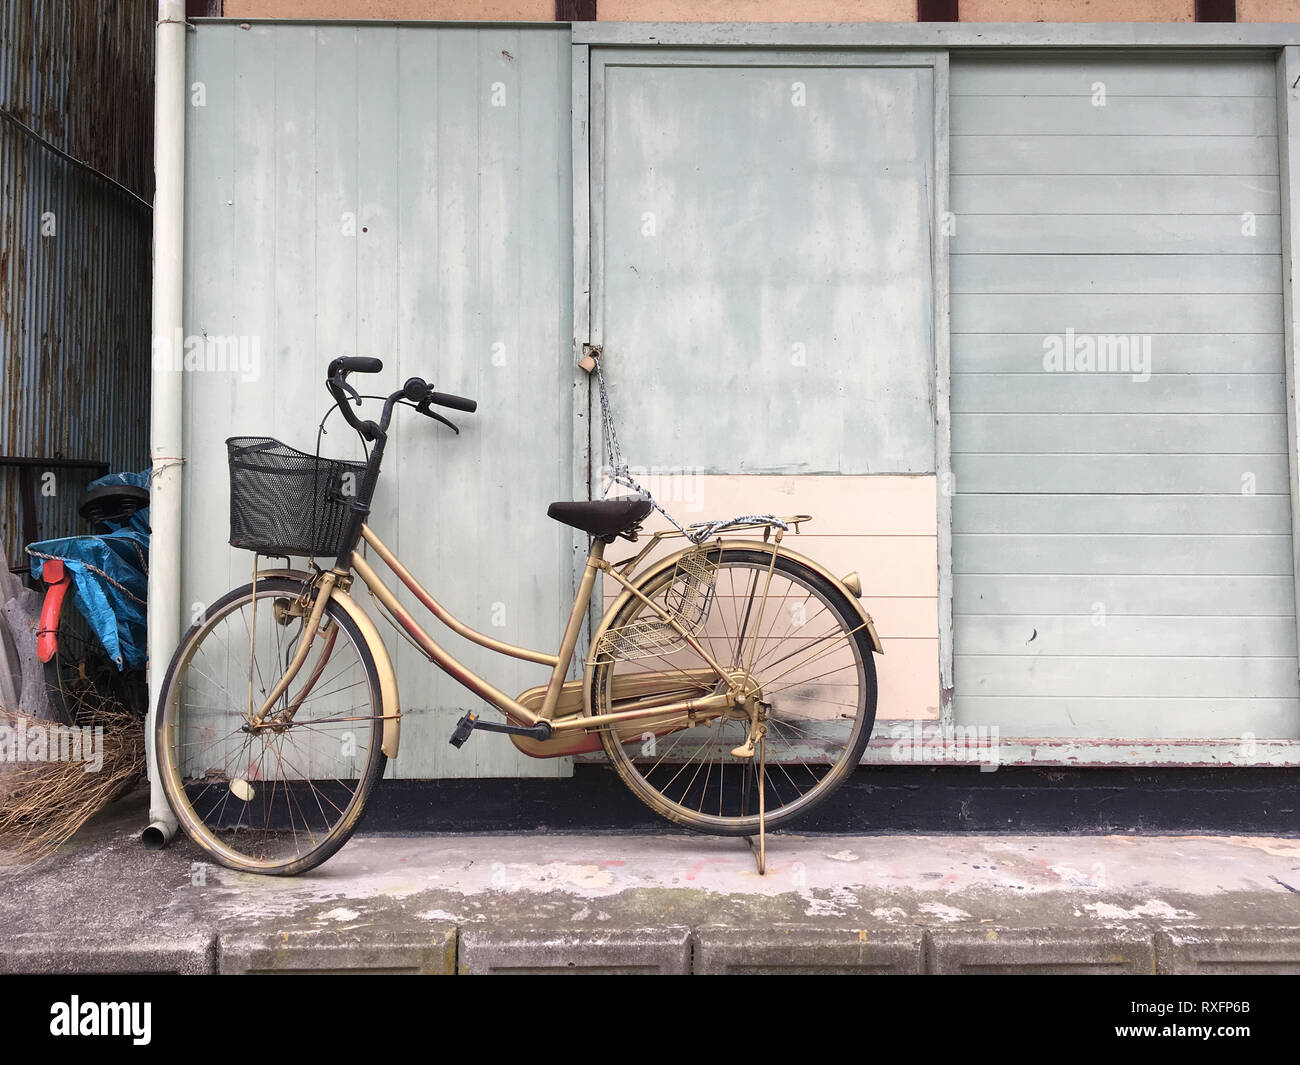 Toyohama, Japan - December 12, 2016: Bike chained to a house in a small japanese island called Toyohama in Hiroshima, Japan Stock Photo